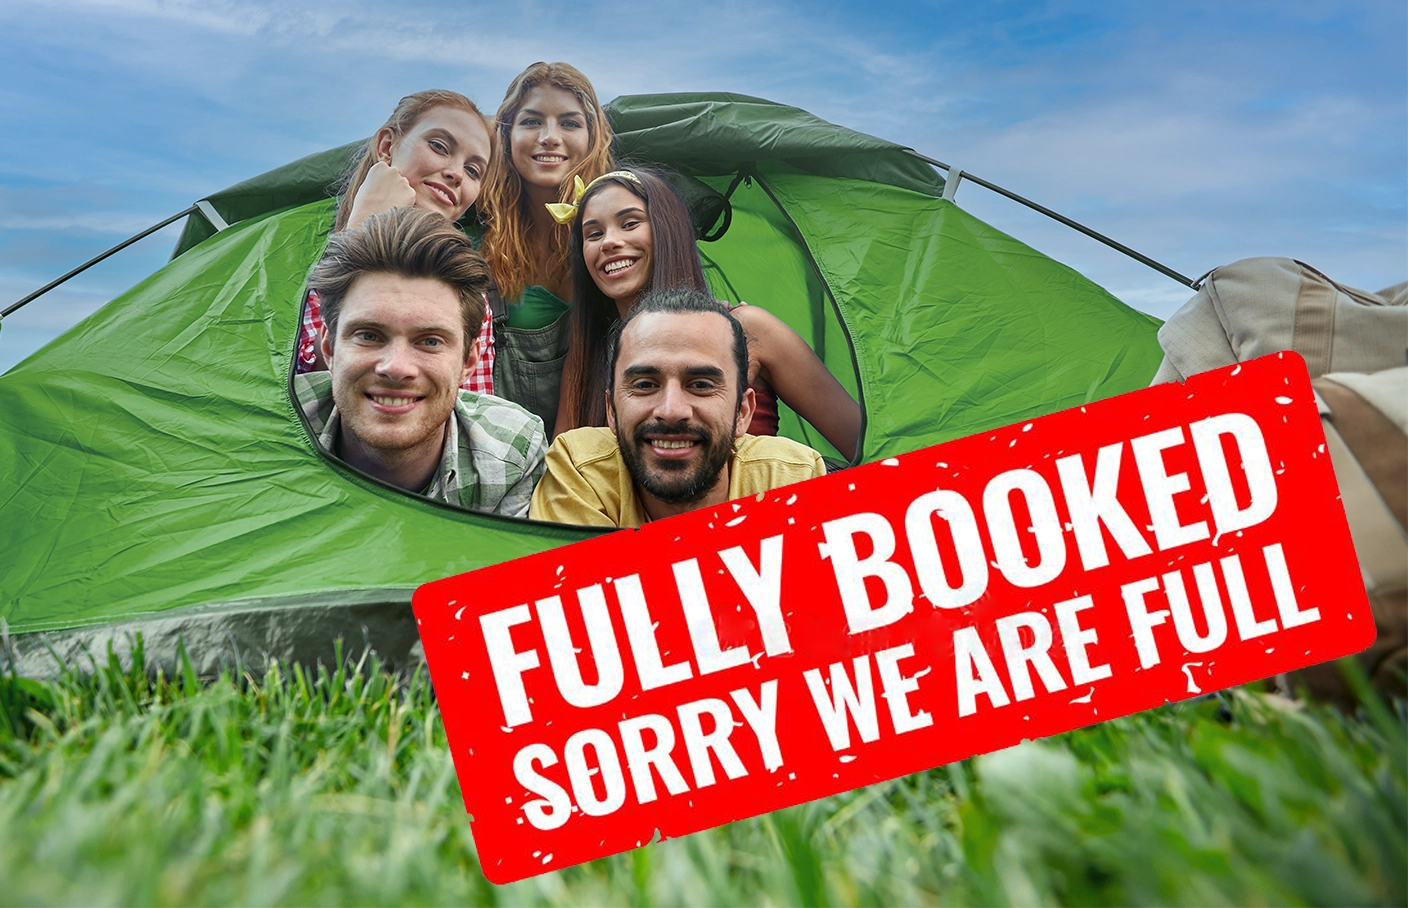 The campsites for the 2023 Formula 1 GP in Spielberg are fully booked!